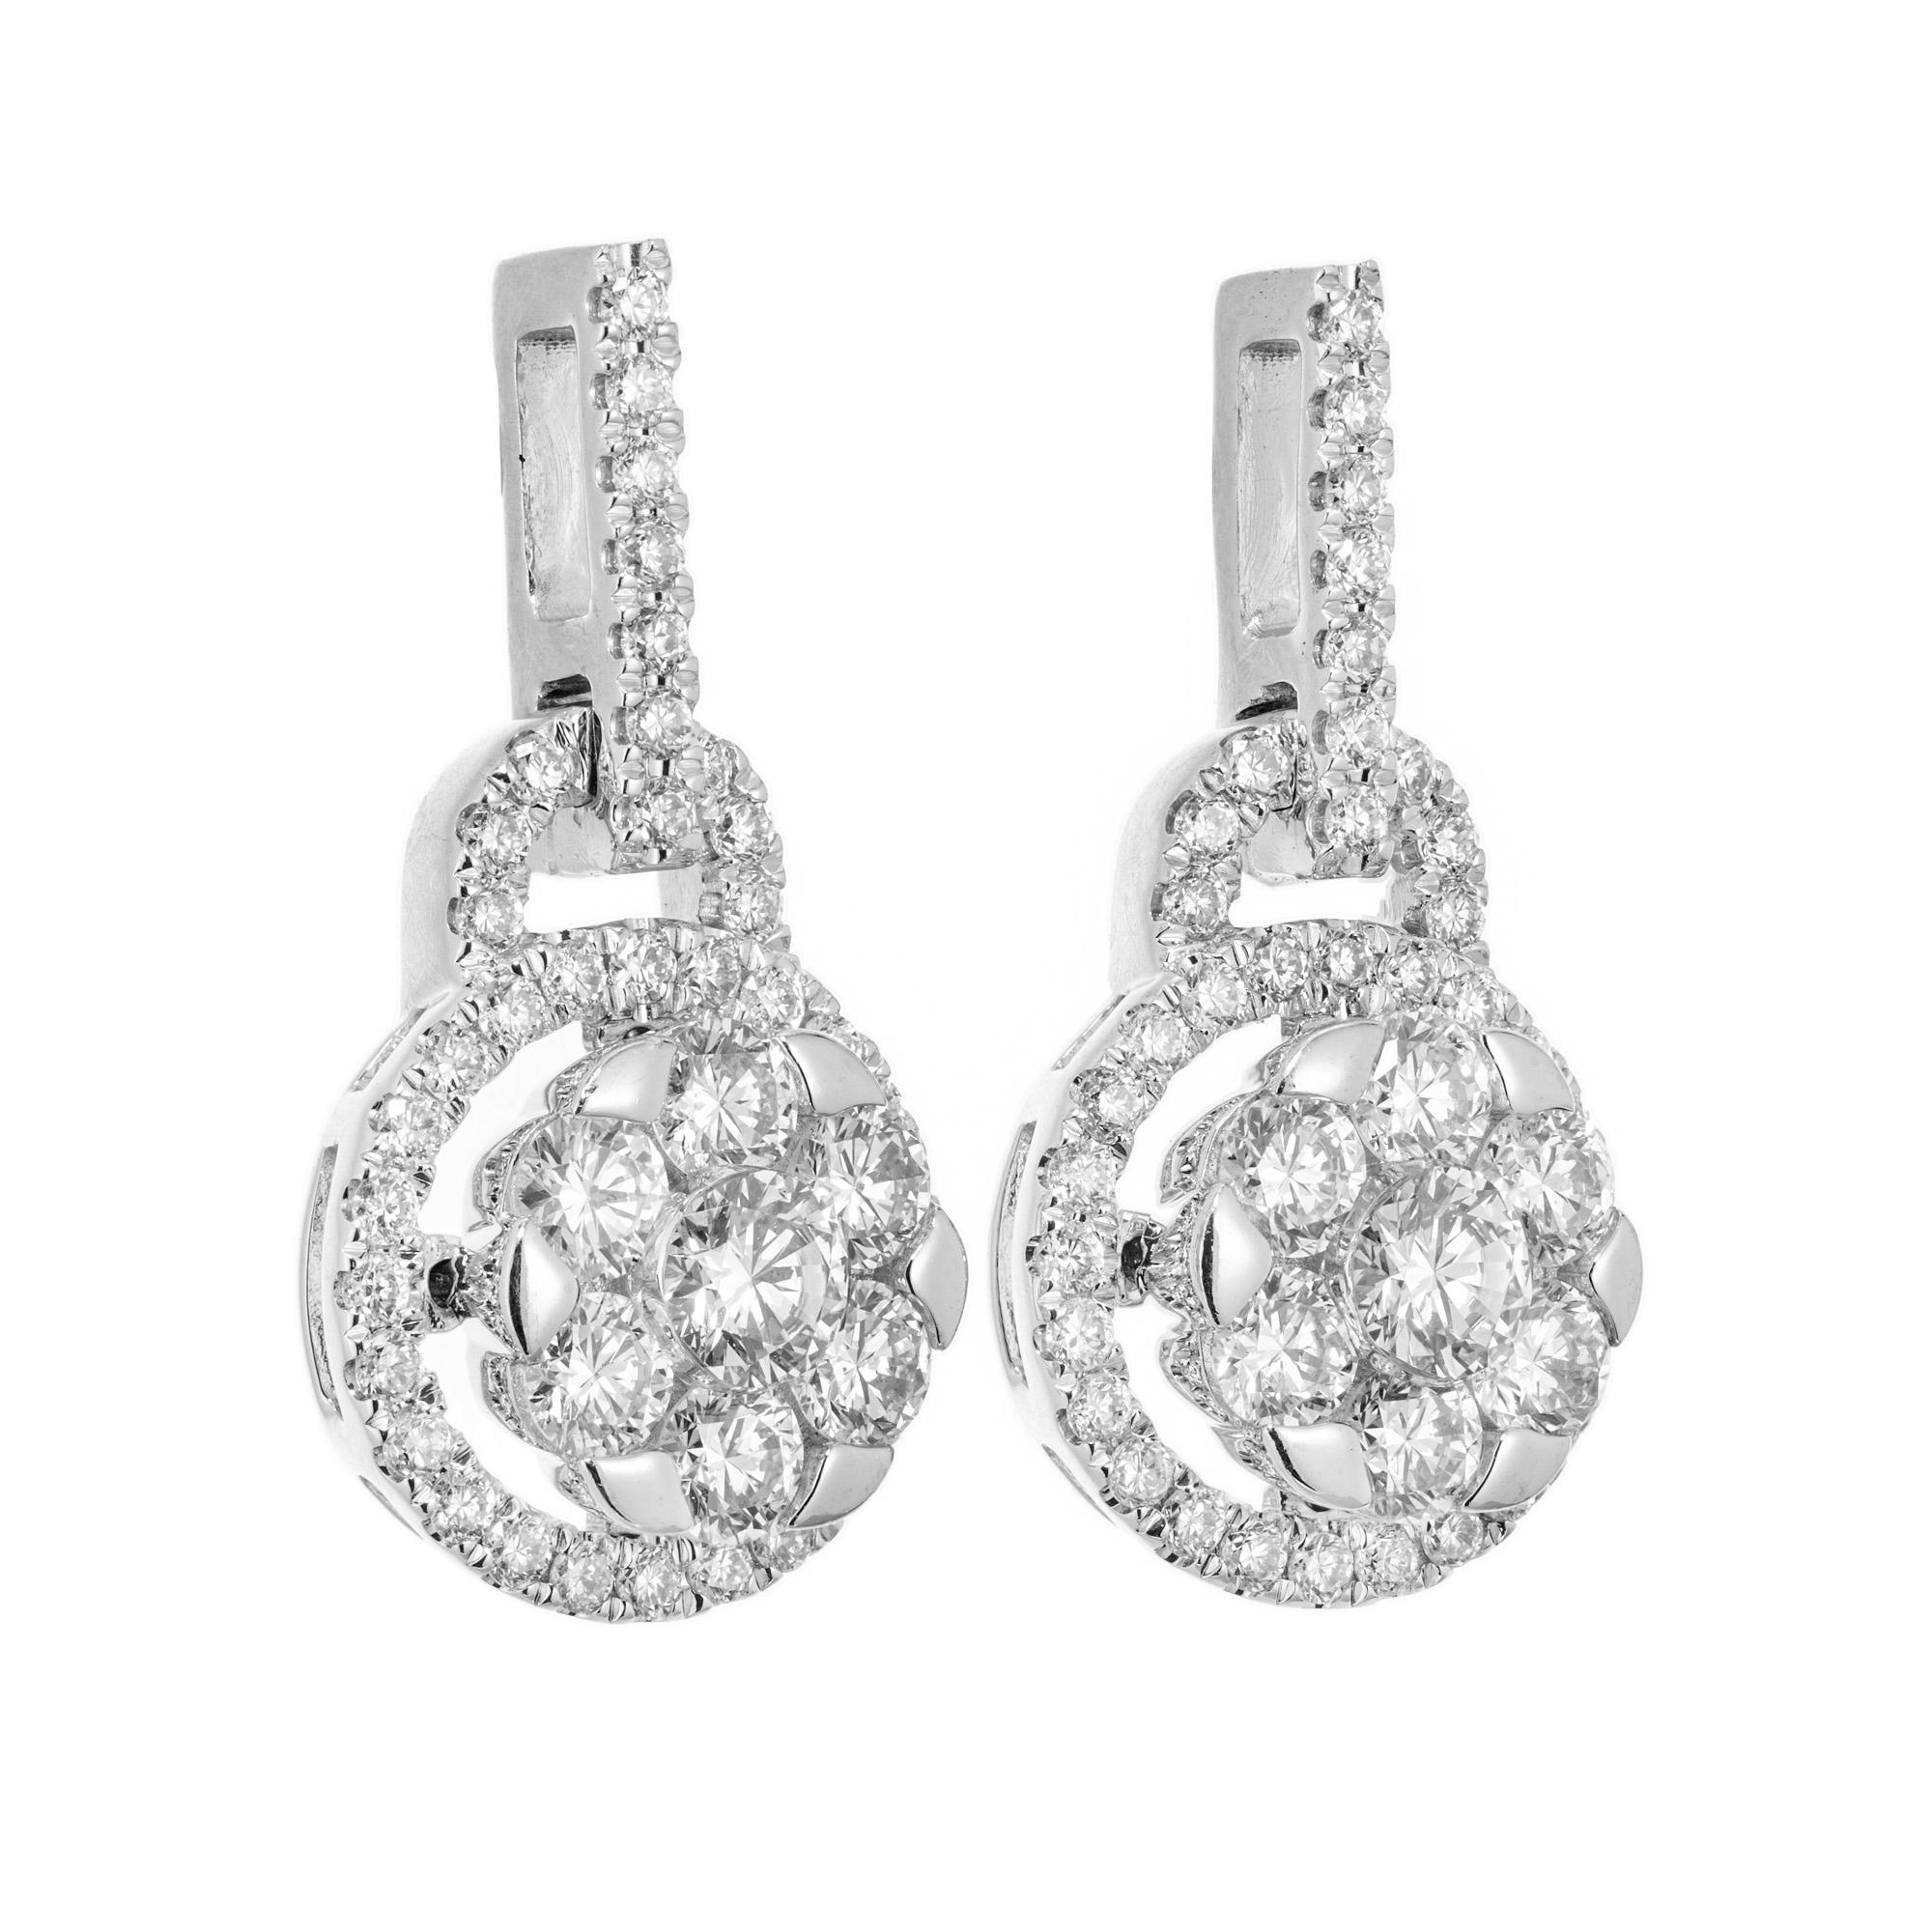 Suspended diamond circular target earrings. 88 round brilliant cut diamonds totaling 1.50cts make up these 14k white gold radiant dangle earrings. Each dangle has a cluster of 7 round diamonds in the middle with a halo of diamonds that are attached